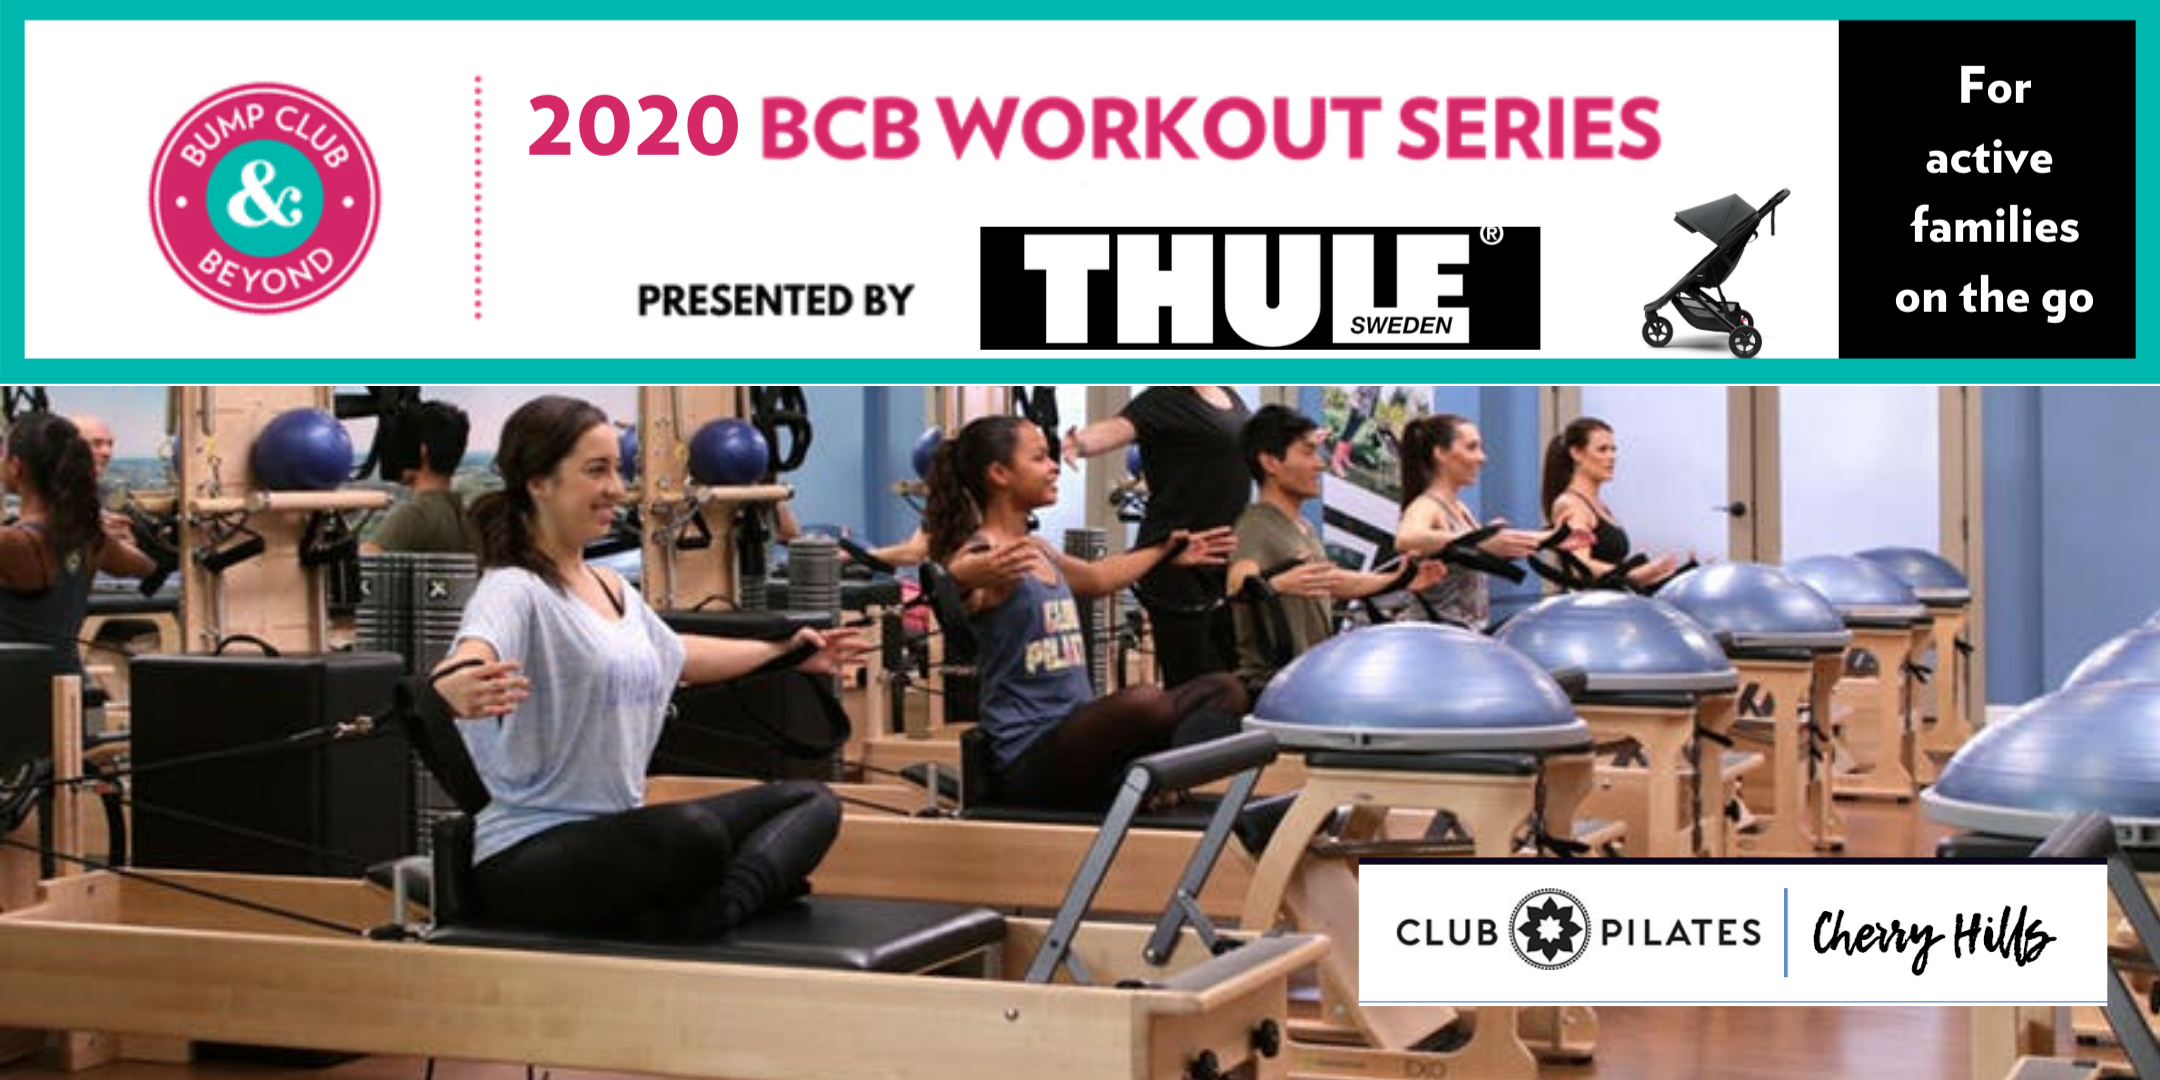 FREE BCB Workout with Club Pilates Cherry Hills Presented by Thule! (Englewood, CO)